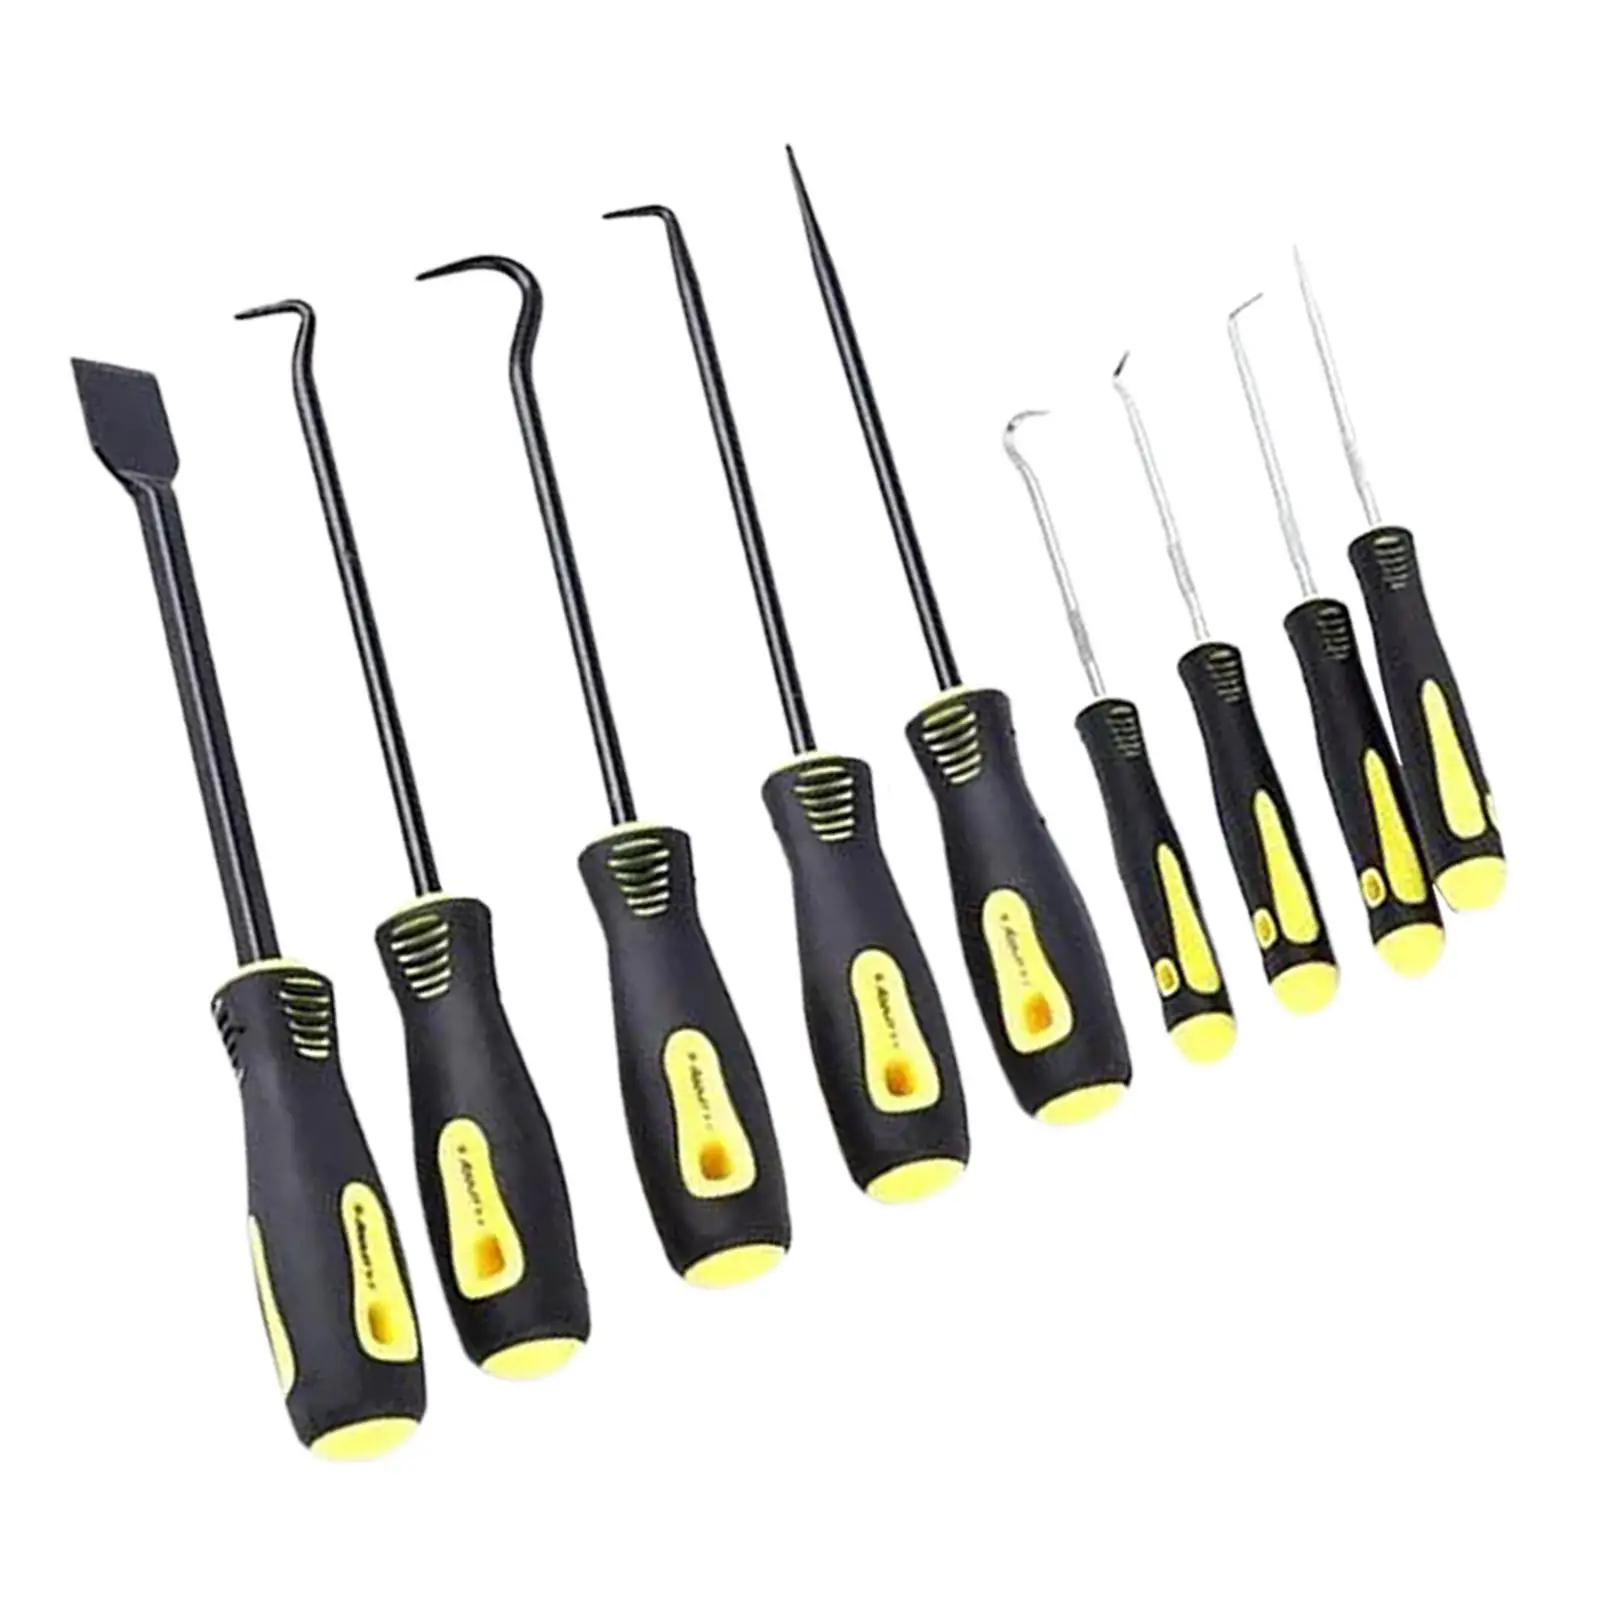 9x Heavy Duty Oil Seal Screwdriver Set Precision Hand Tools Oil Seal Hook Pick and Hook for Vehicle Auto Car Maintenance Tool